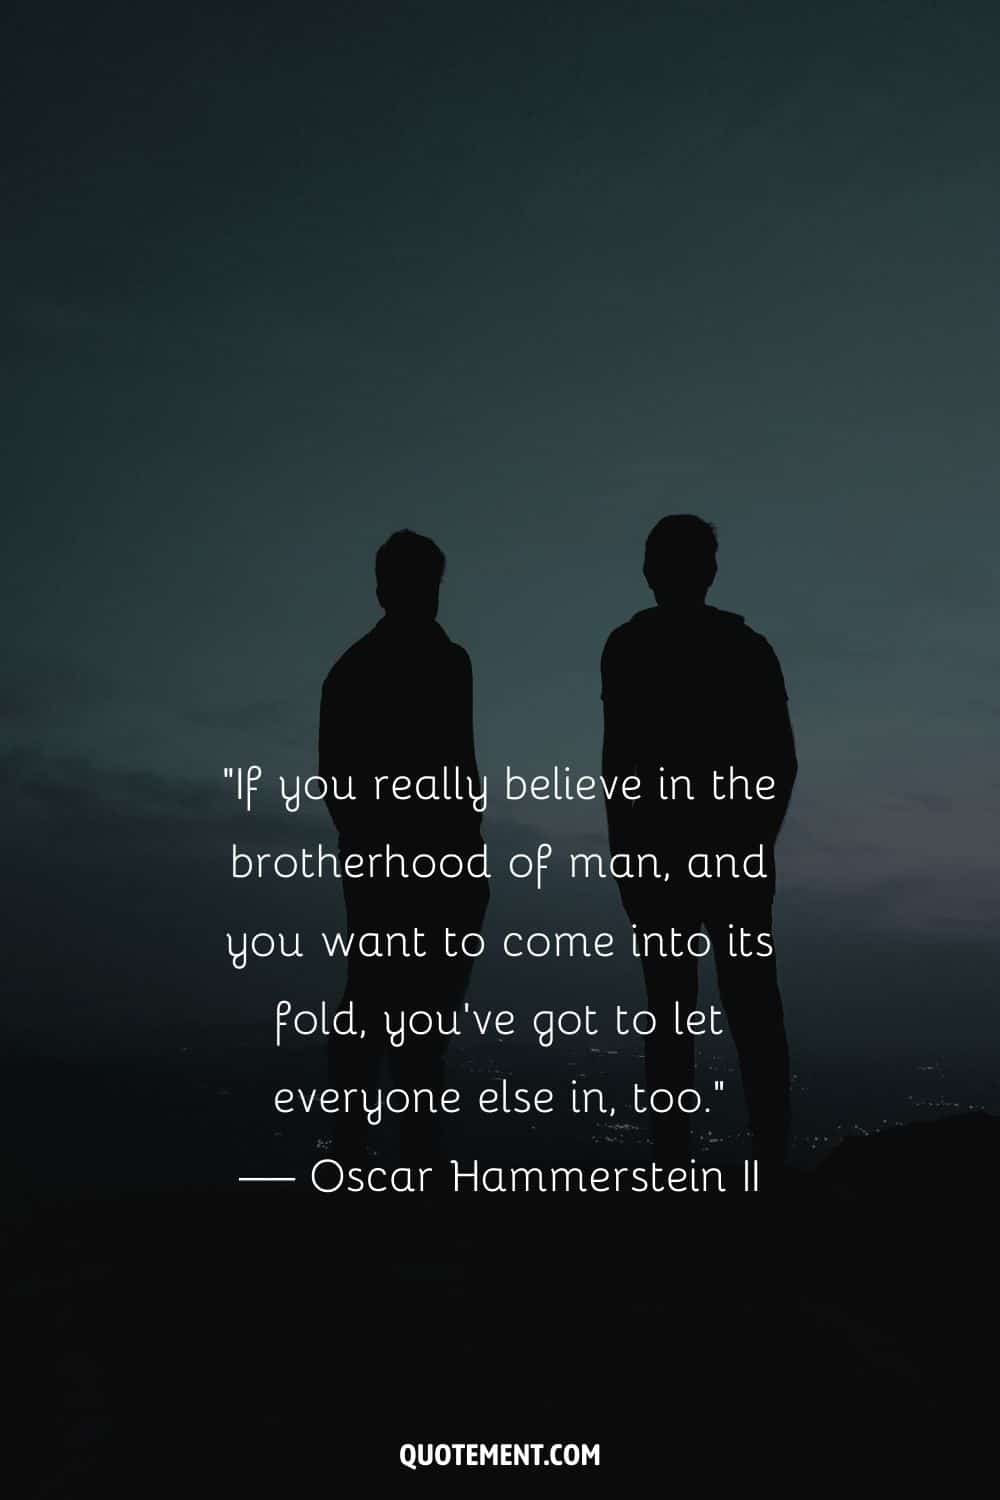 “If you really believe in the brotherhood of man, and you want to come into its fold, you’ve got to let everyone else in, too.” — Oscar Hammerstein II